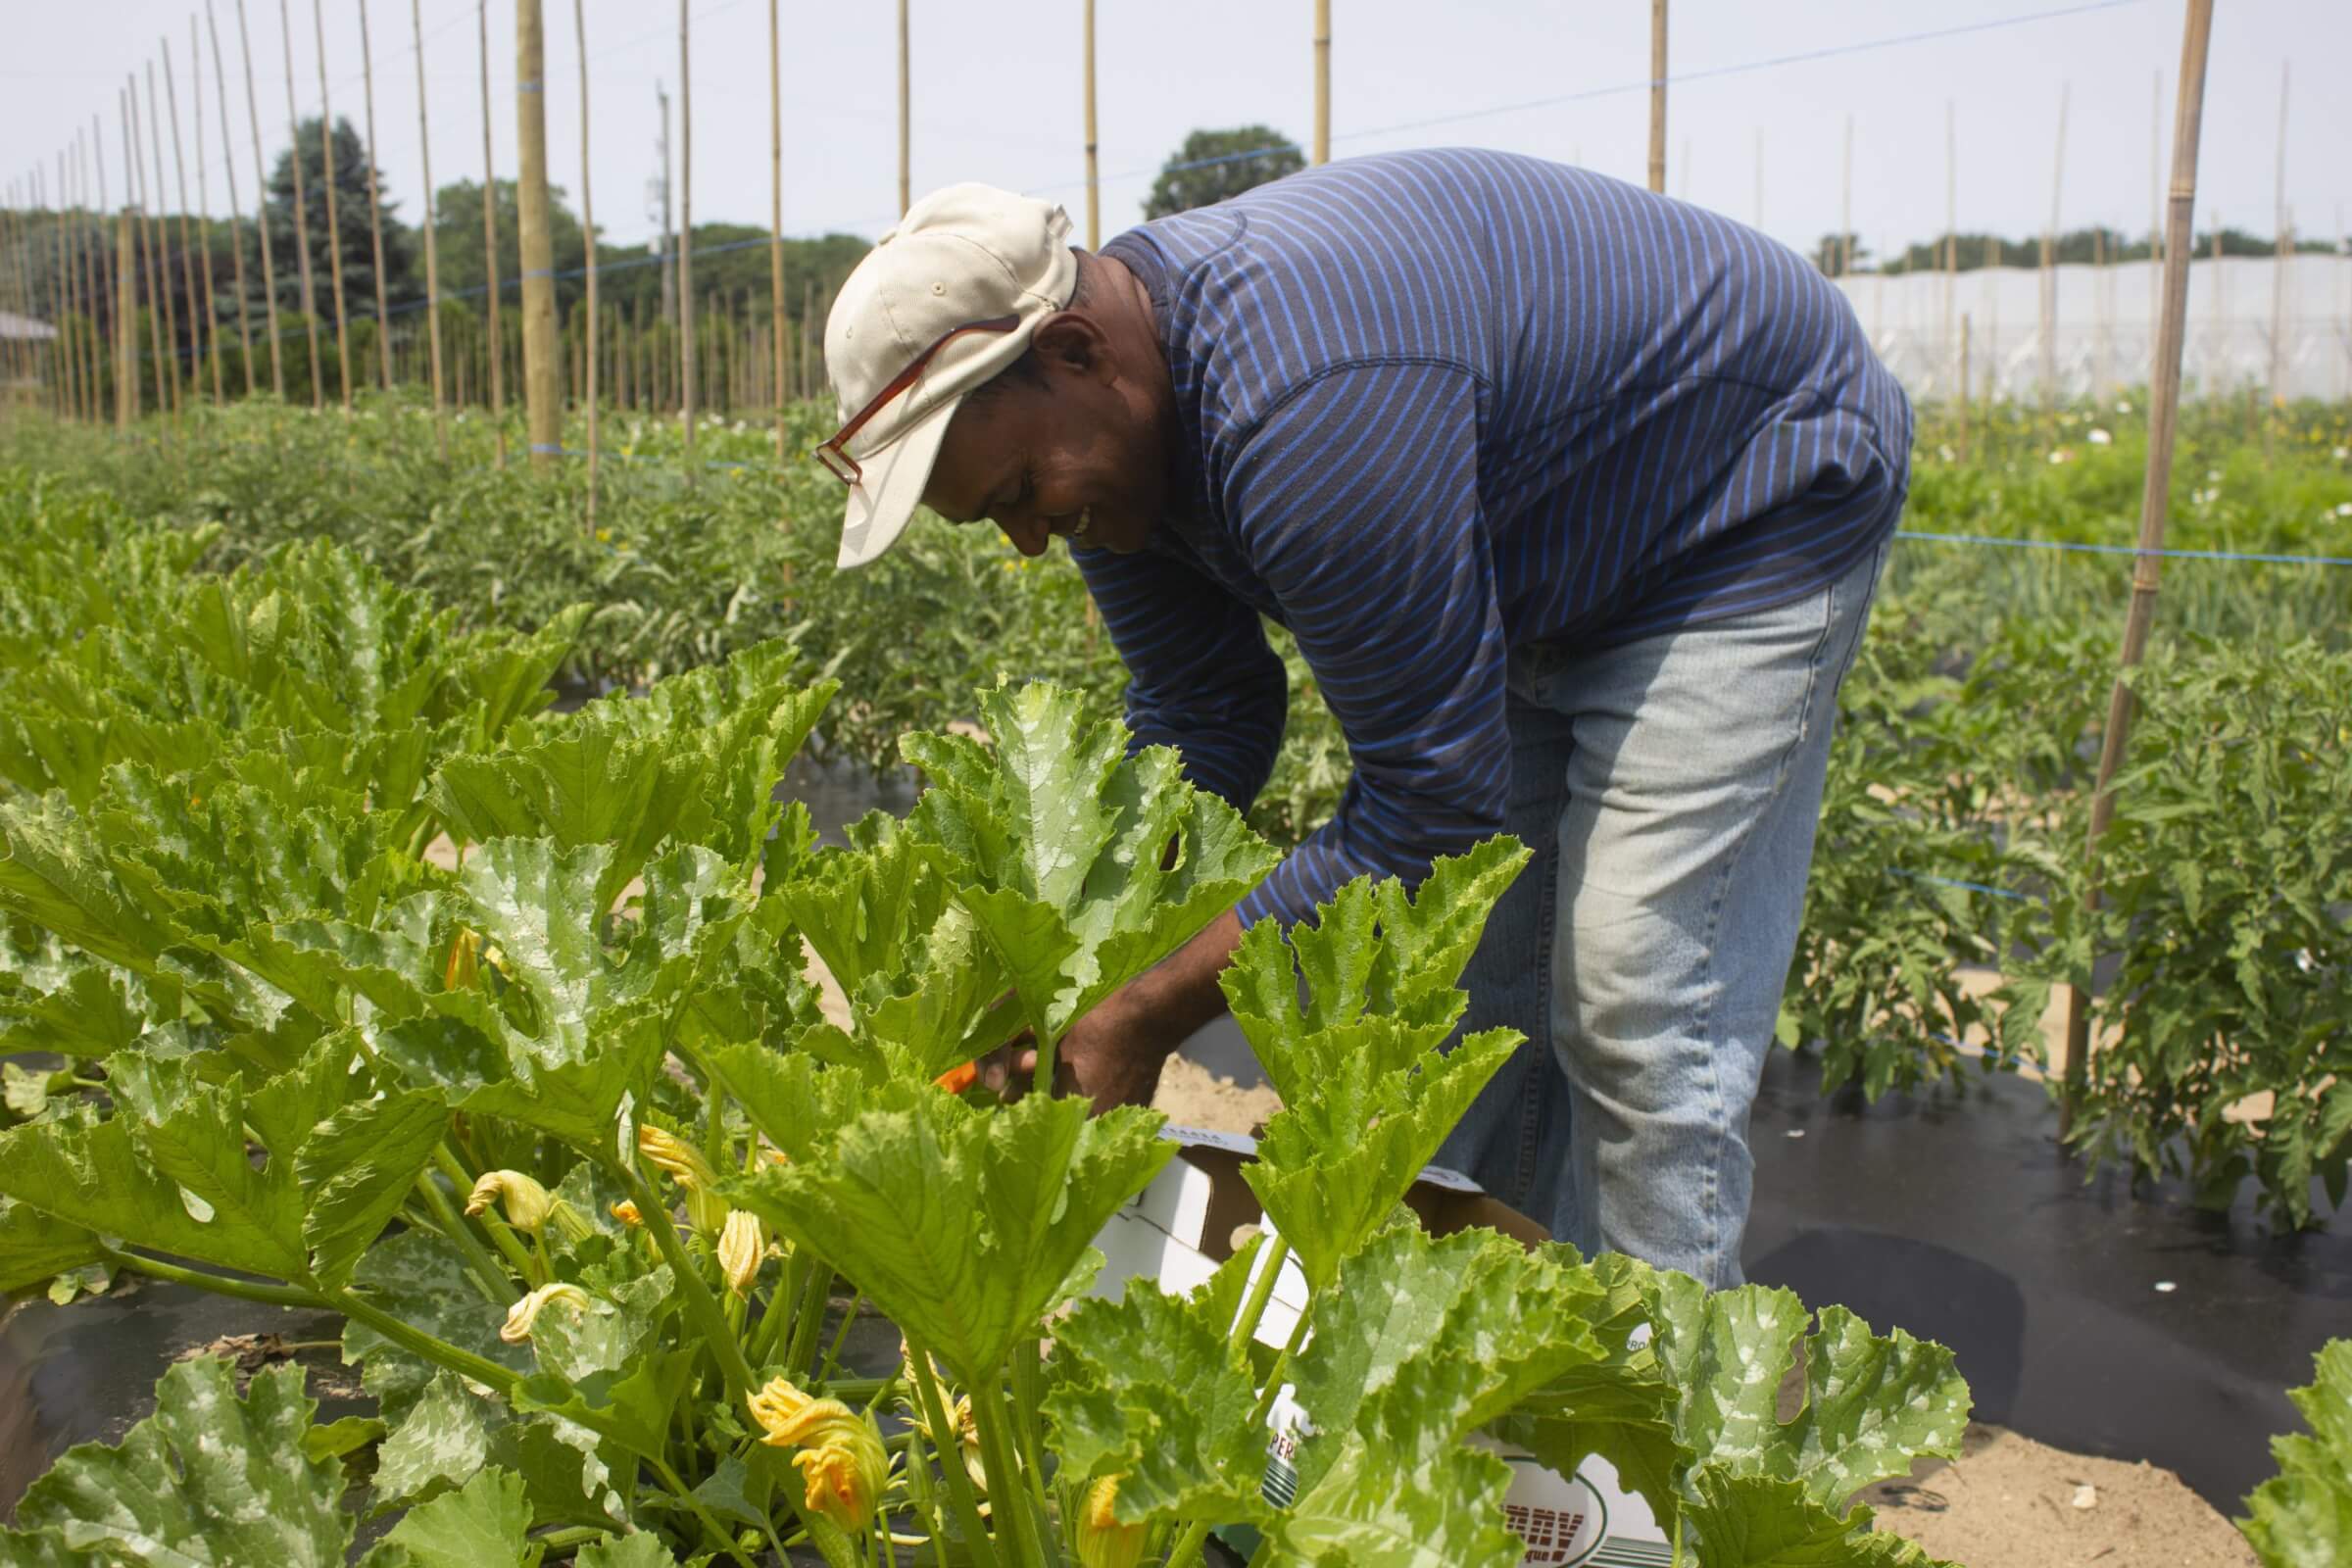 male migrant worker bending over to work on crops